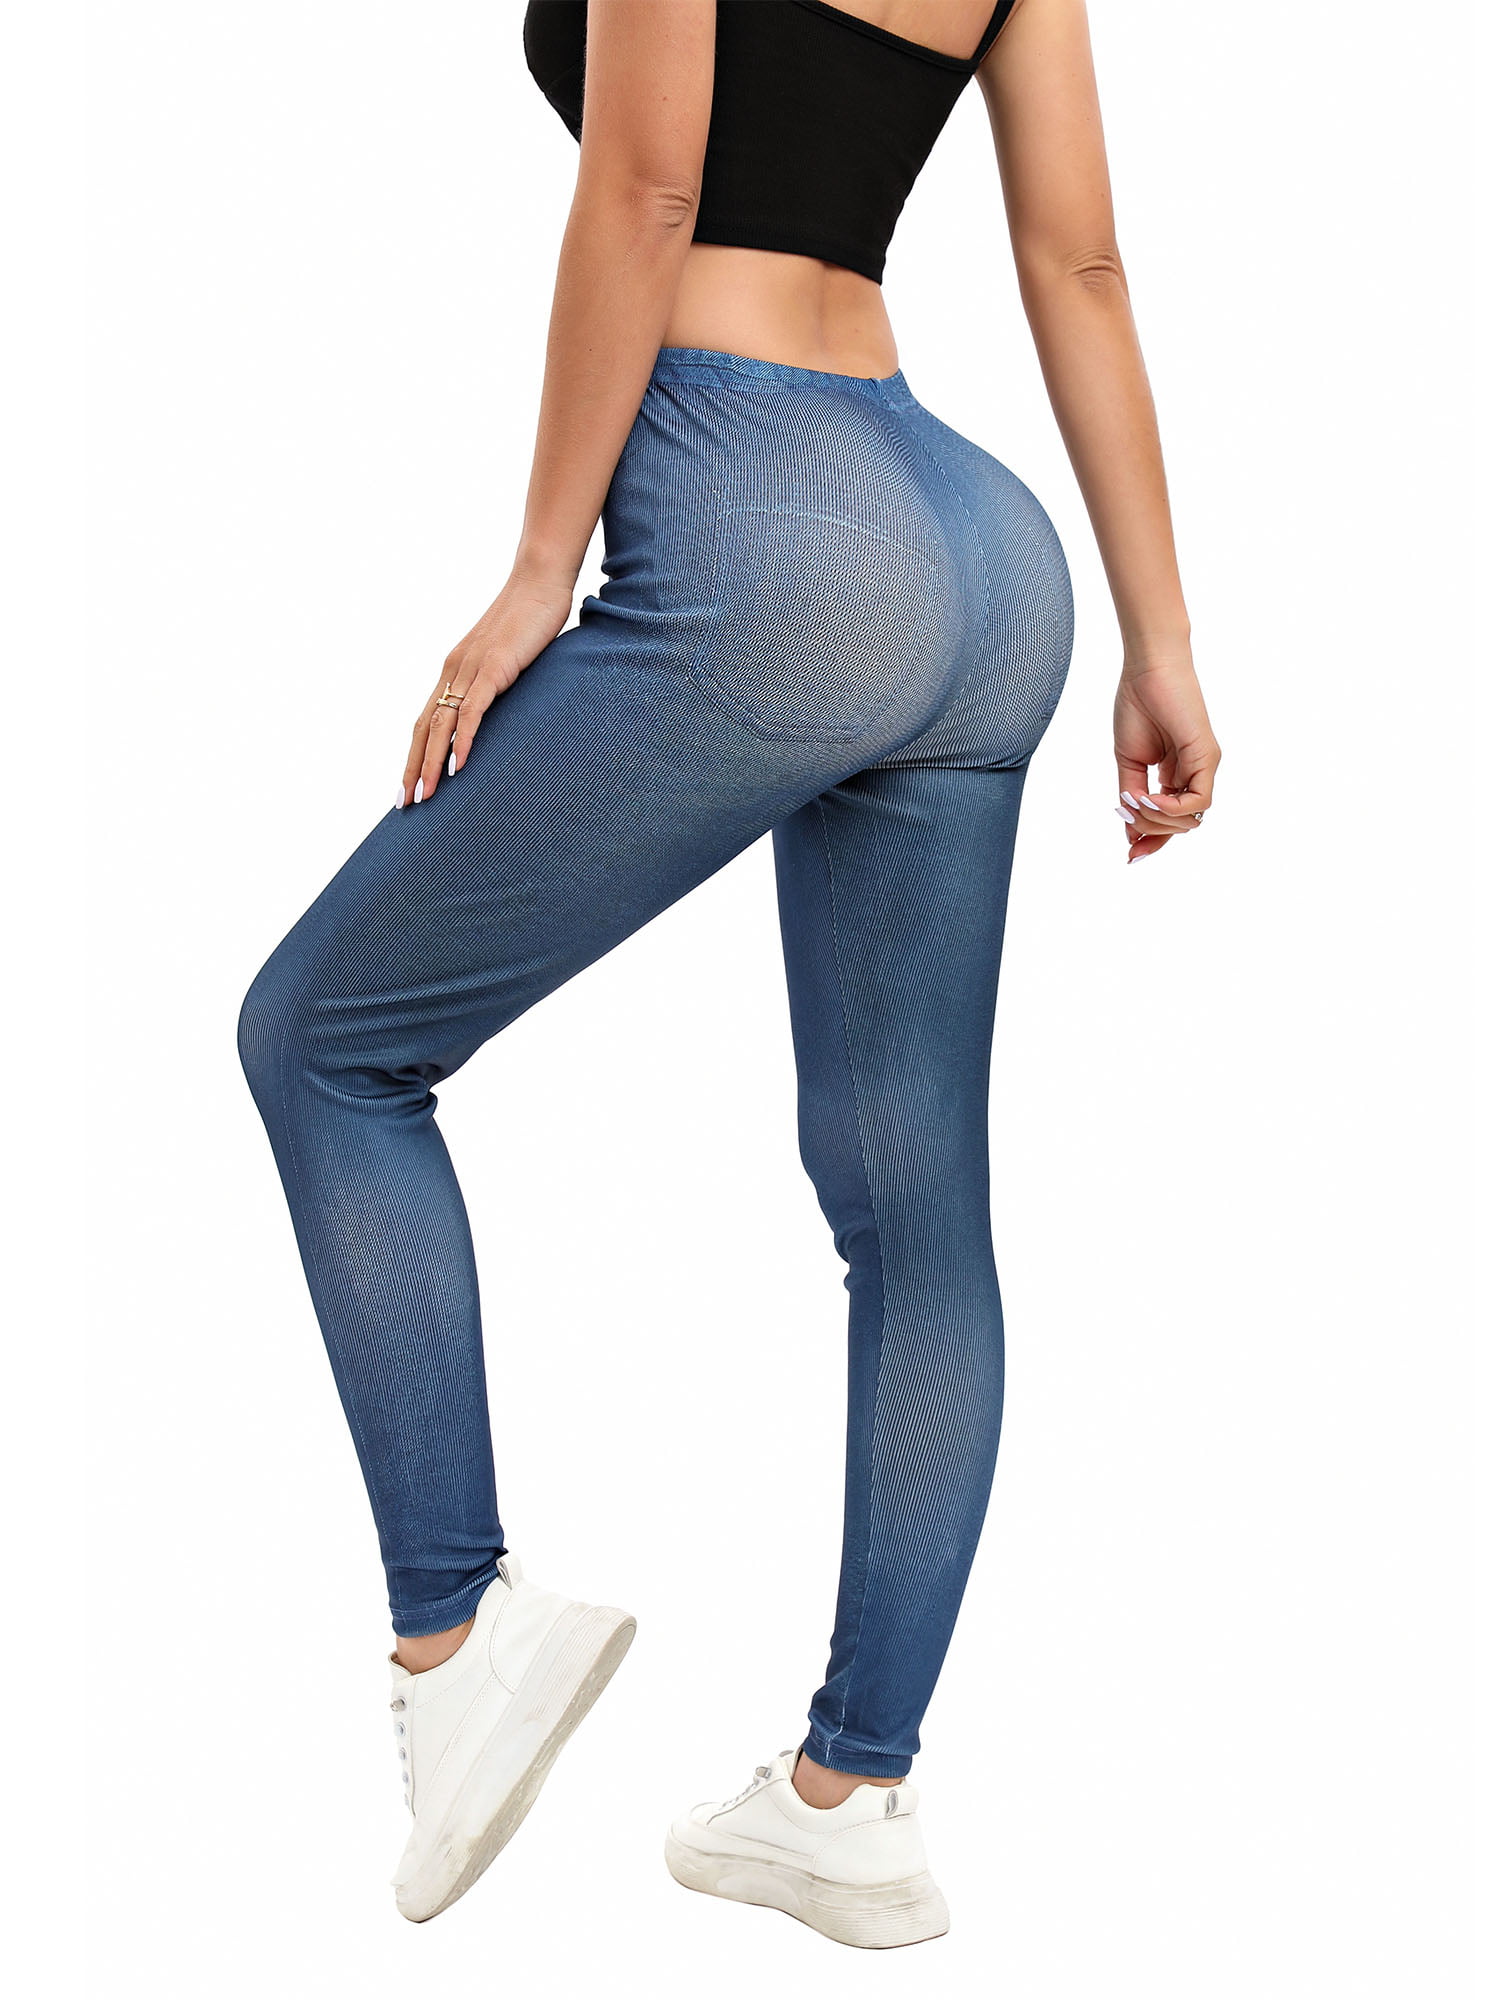 Glonme Ladies Fake Jeans Seamless Leggings Tummy Control Faux Denim Pant  Workout Comfy Jeggings Stretch High Waist Bottoms Blue-B S 